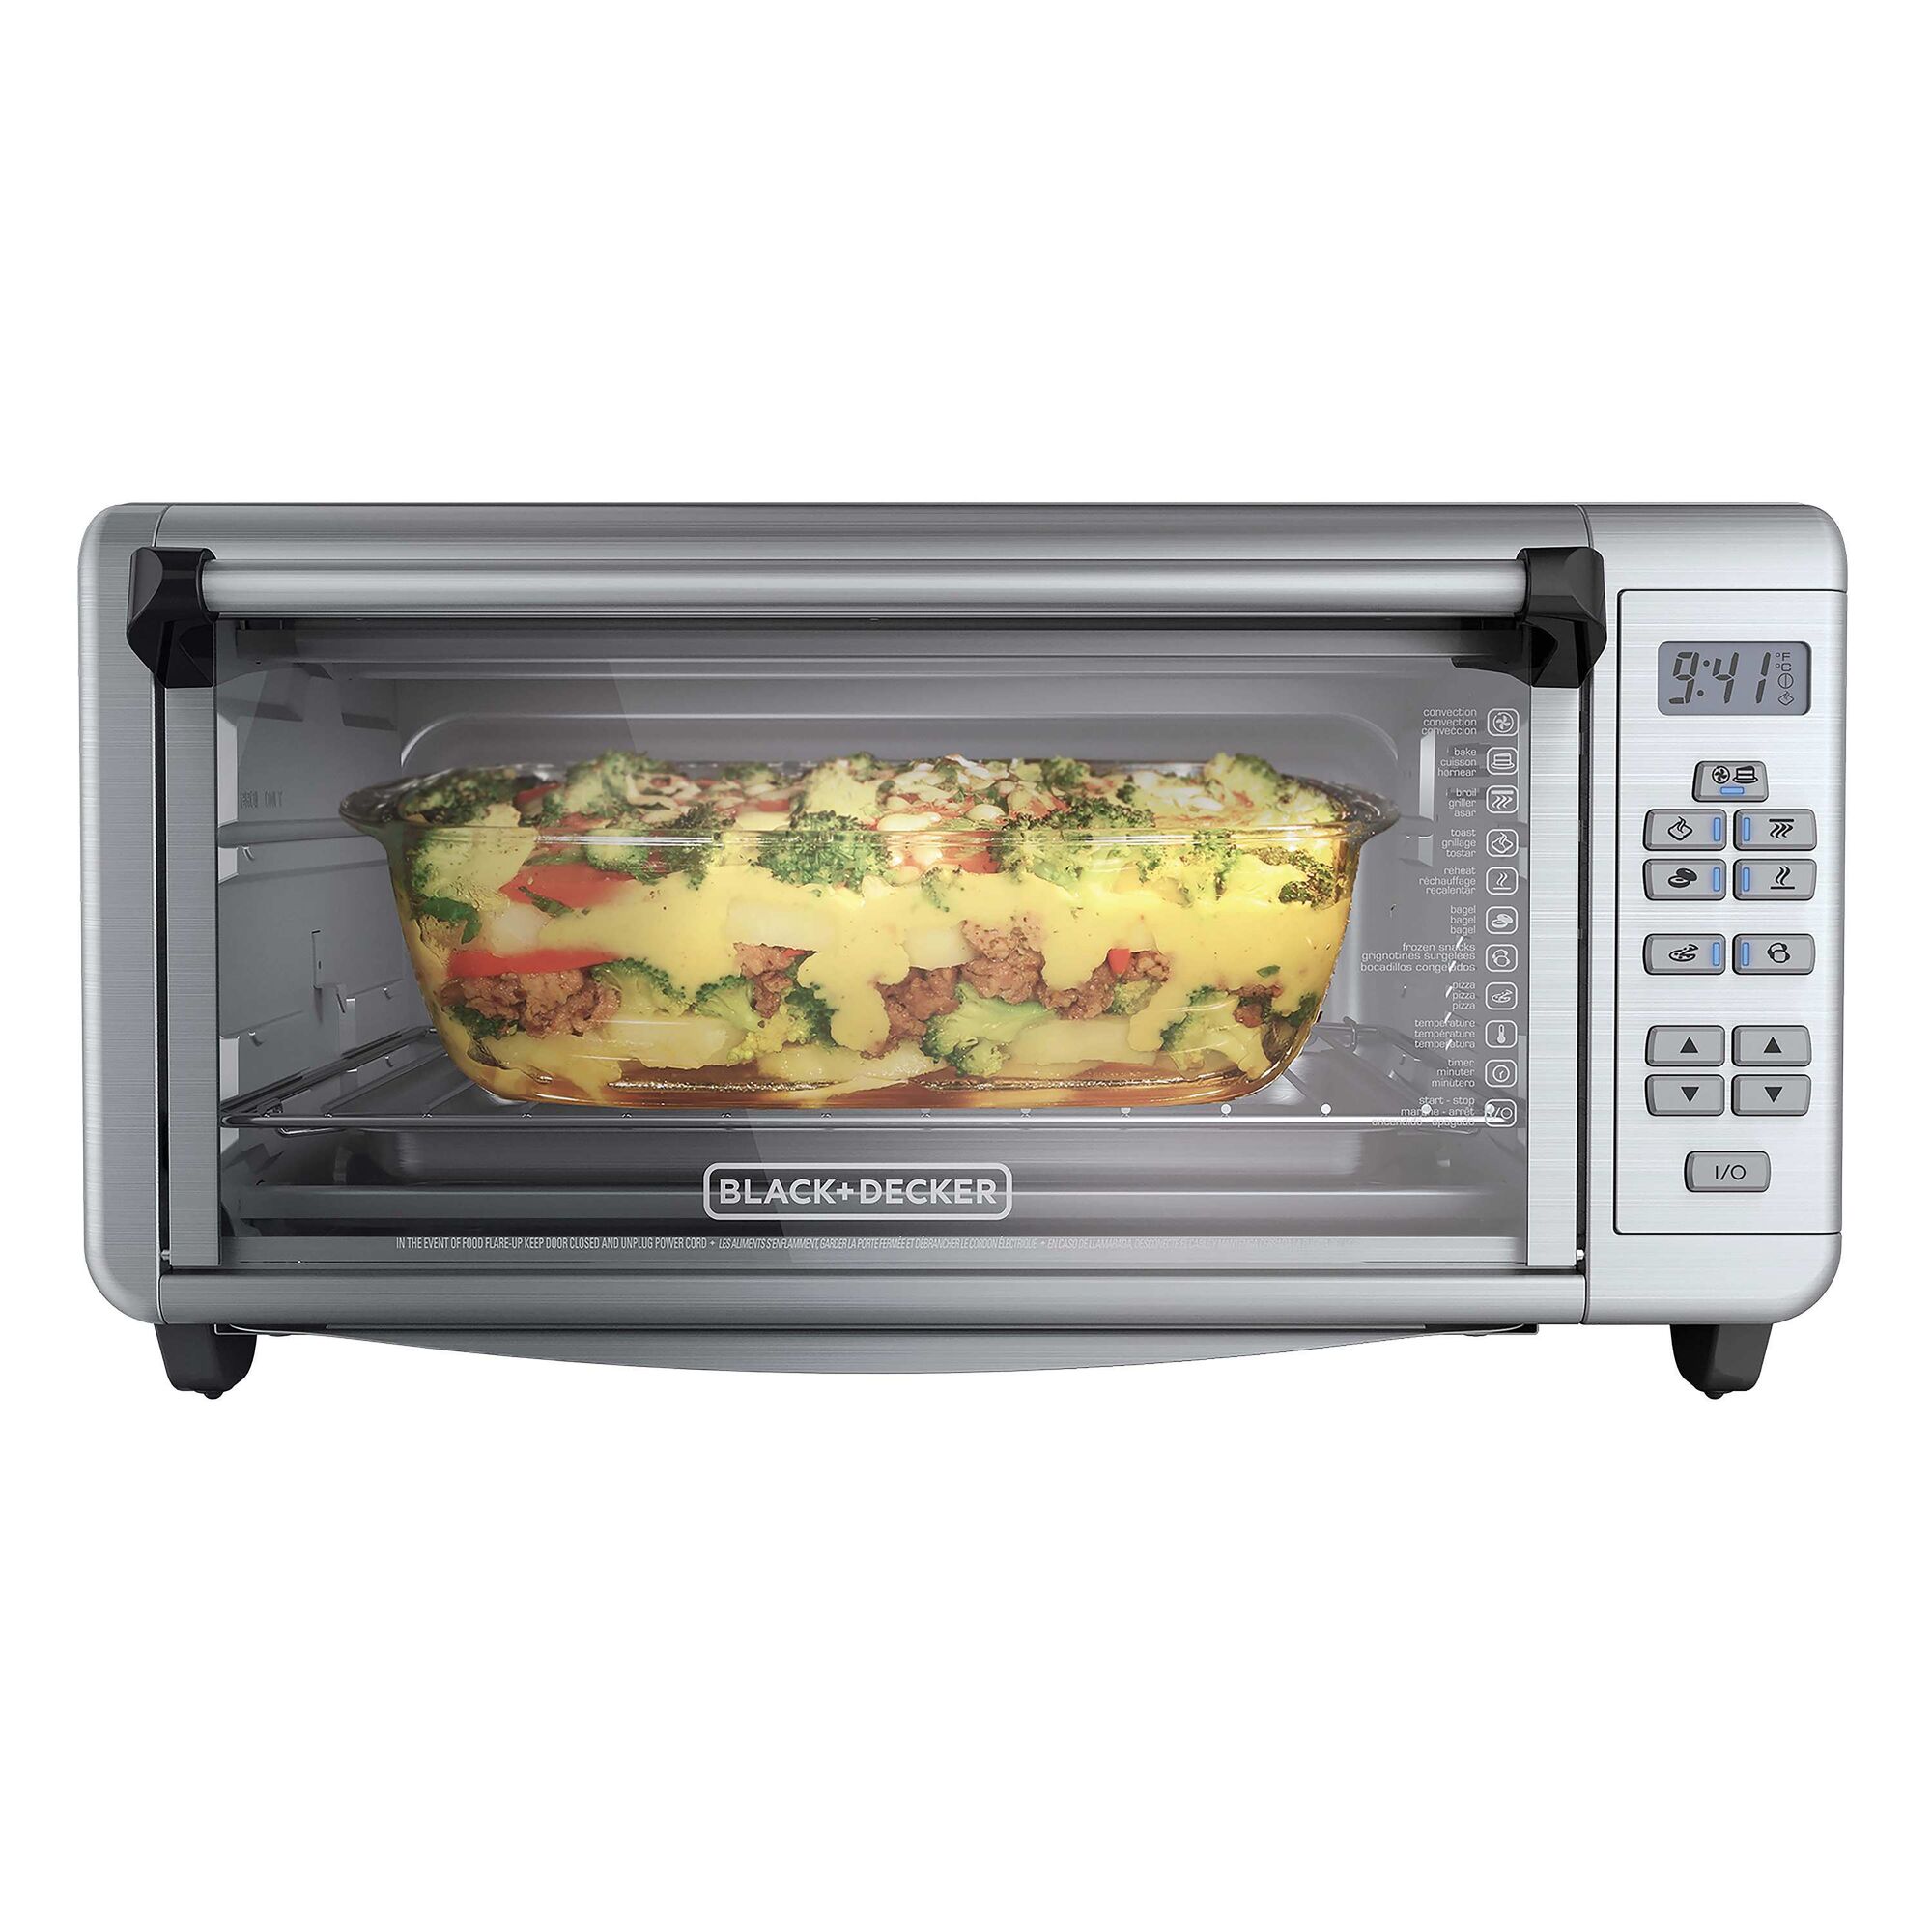 8 Slice digital extra wide convection oven.